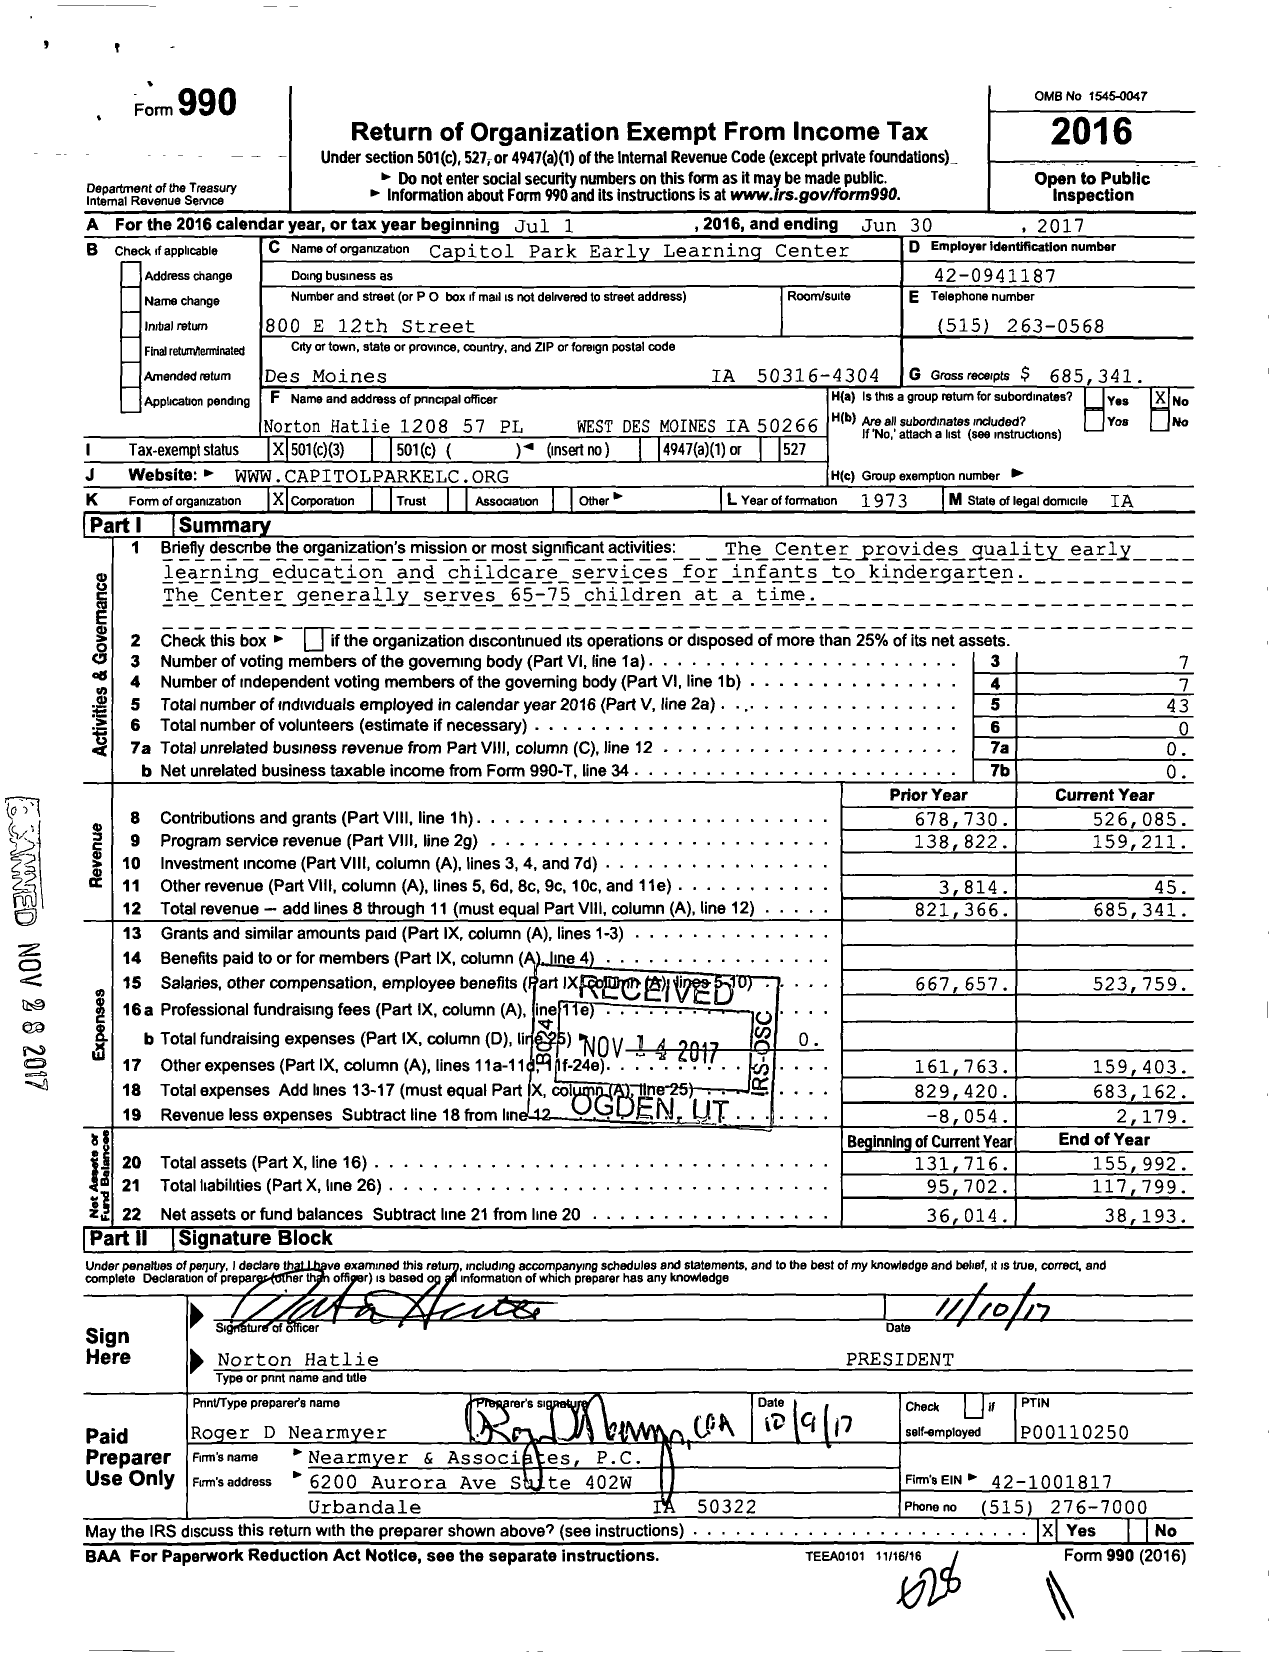 Image of first page of 2016 Form 990 for Capitol Park Early Learning Center